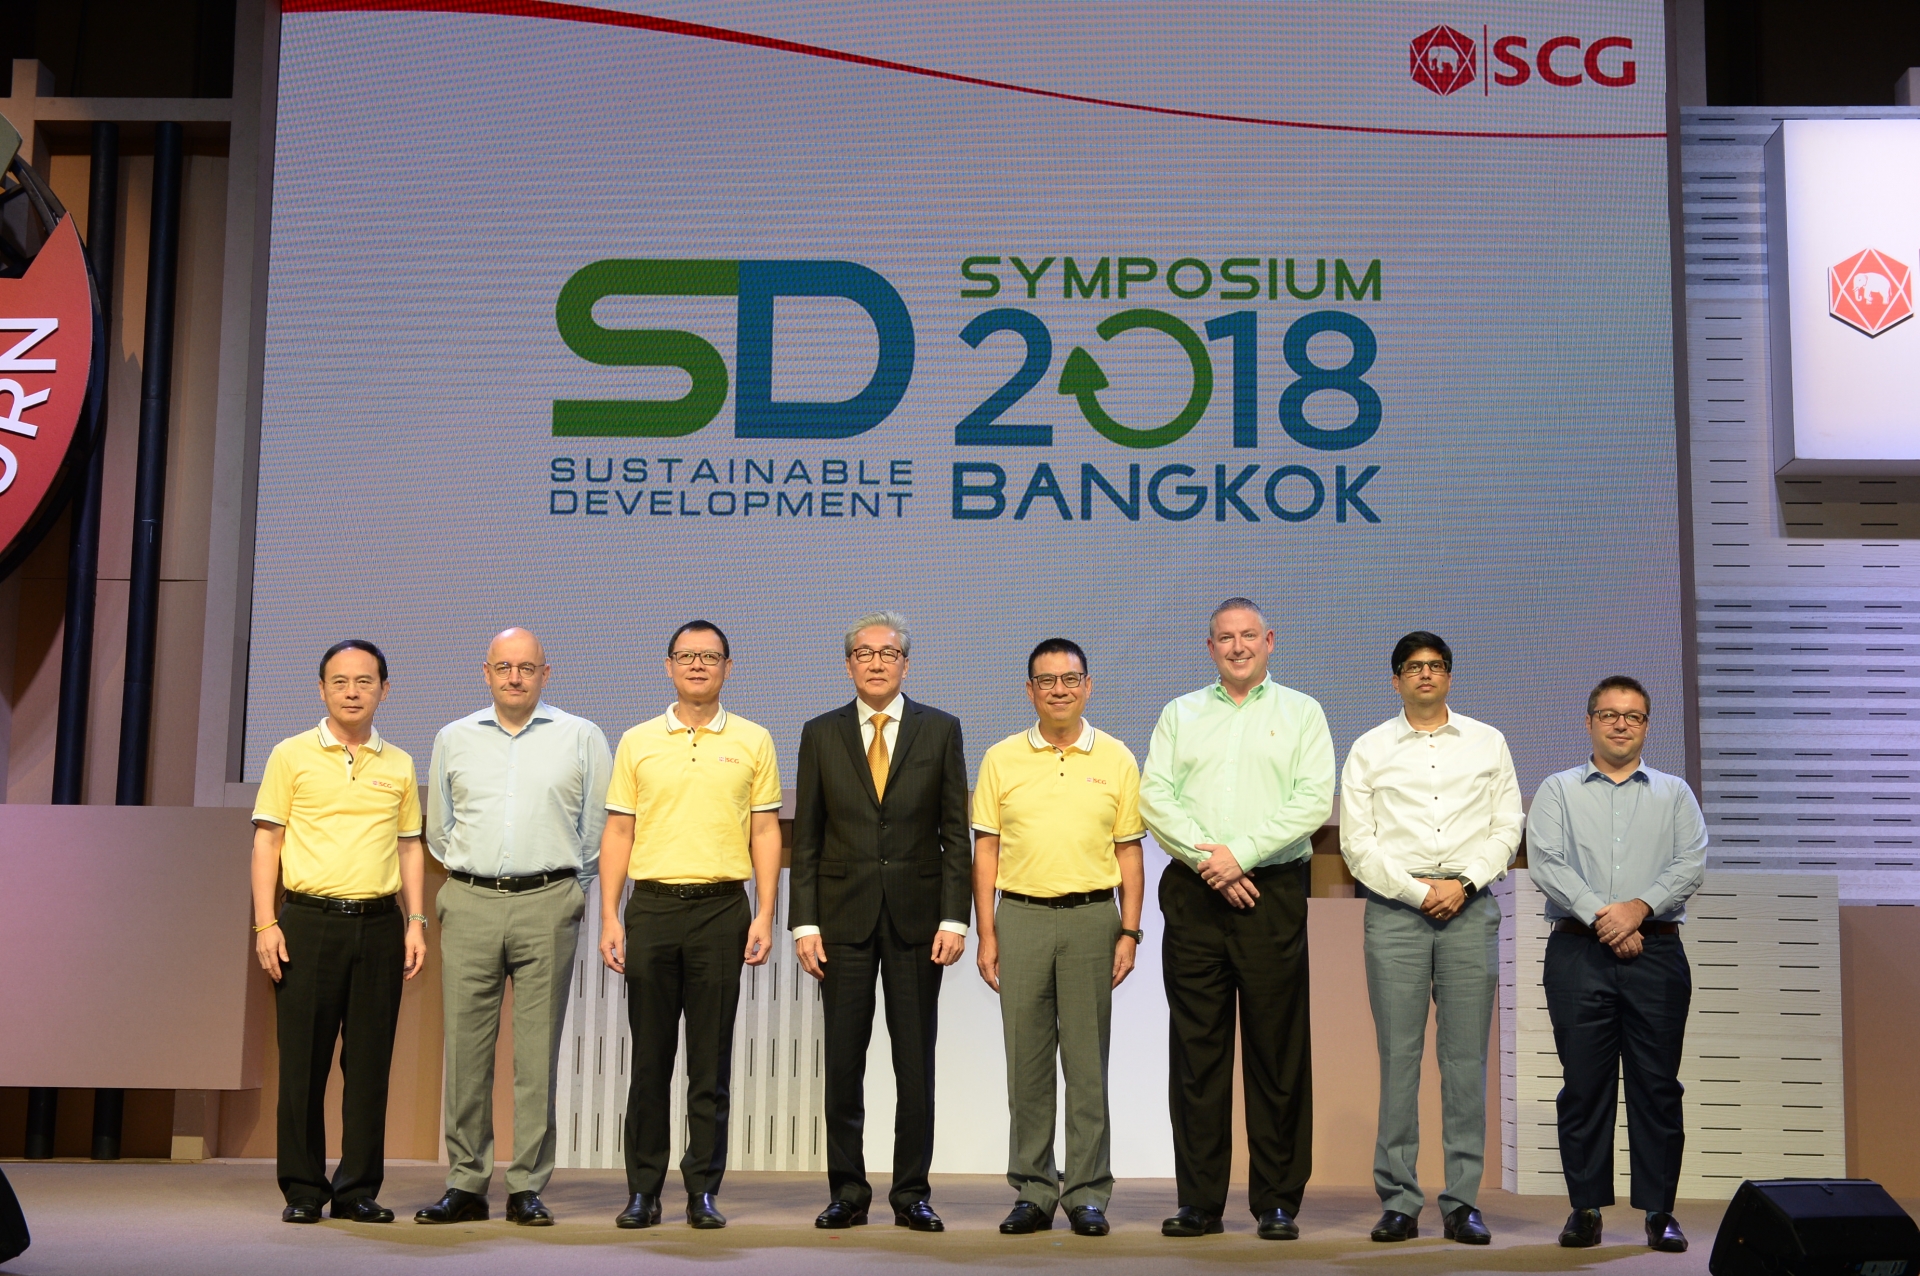 scg heads for circular economy by success stories